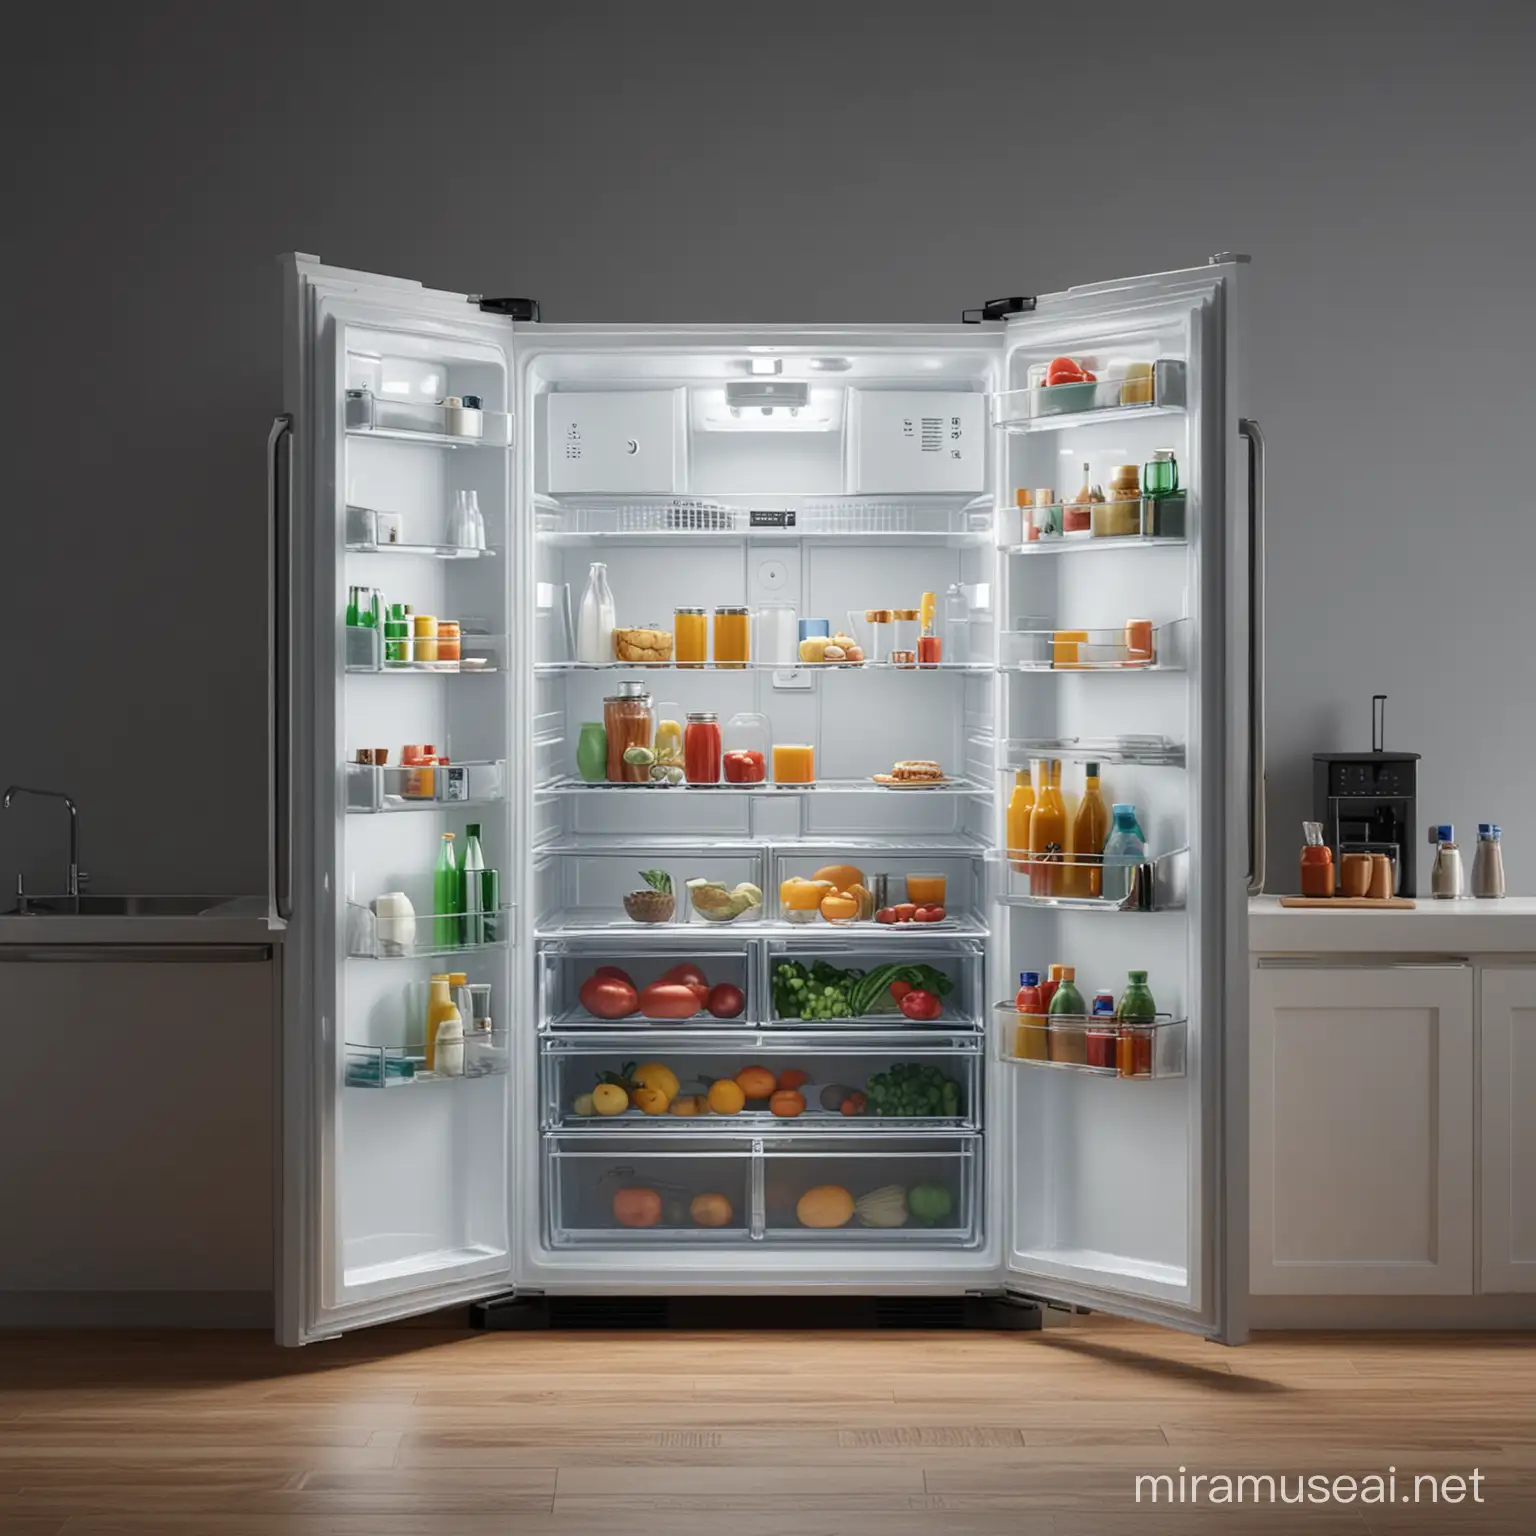 full frontal view of the open empty photorealistic refrigerator in the night kitchen